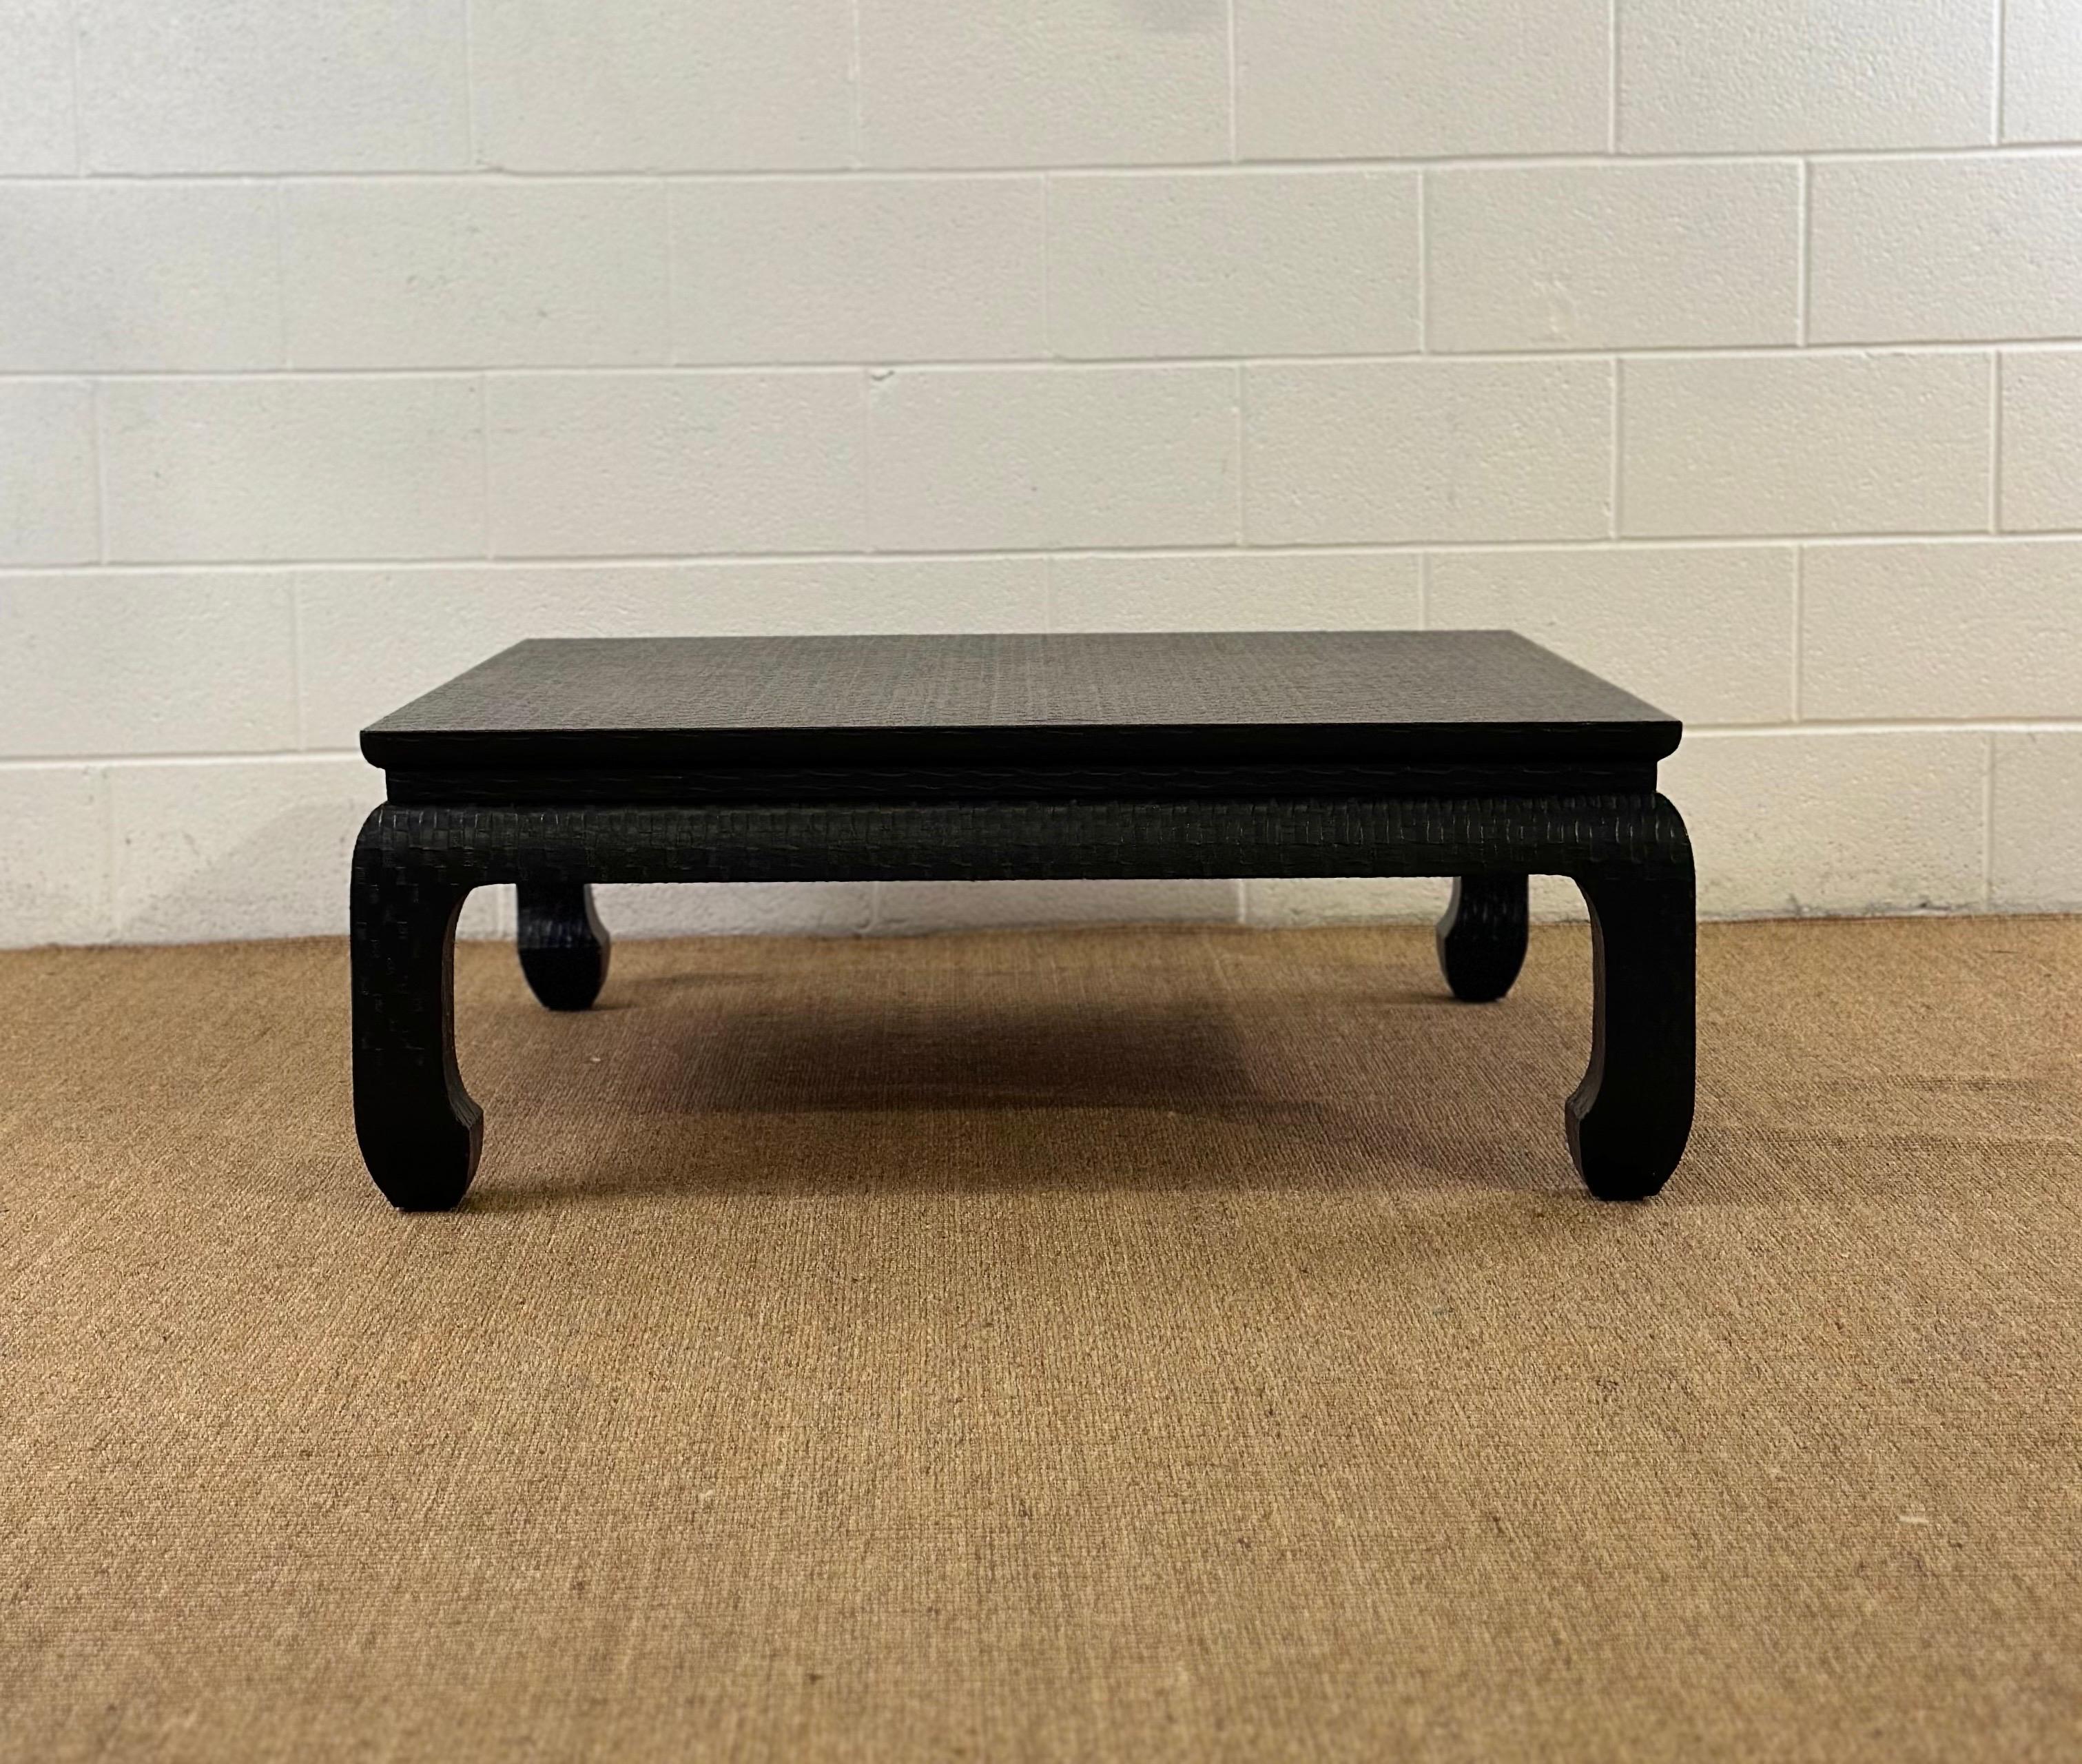 We are very pleased to offer a chic coffee table, by Baker Furniture, circa the 1970s. This exquisite table showcases a textured, patterned raffia wrap in an elegant black finish, echoing the renowned style of Karl Springer.  This piece combines